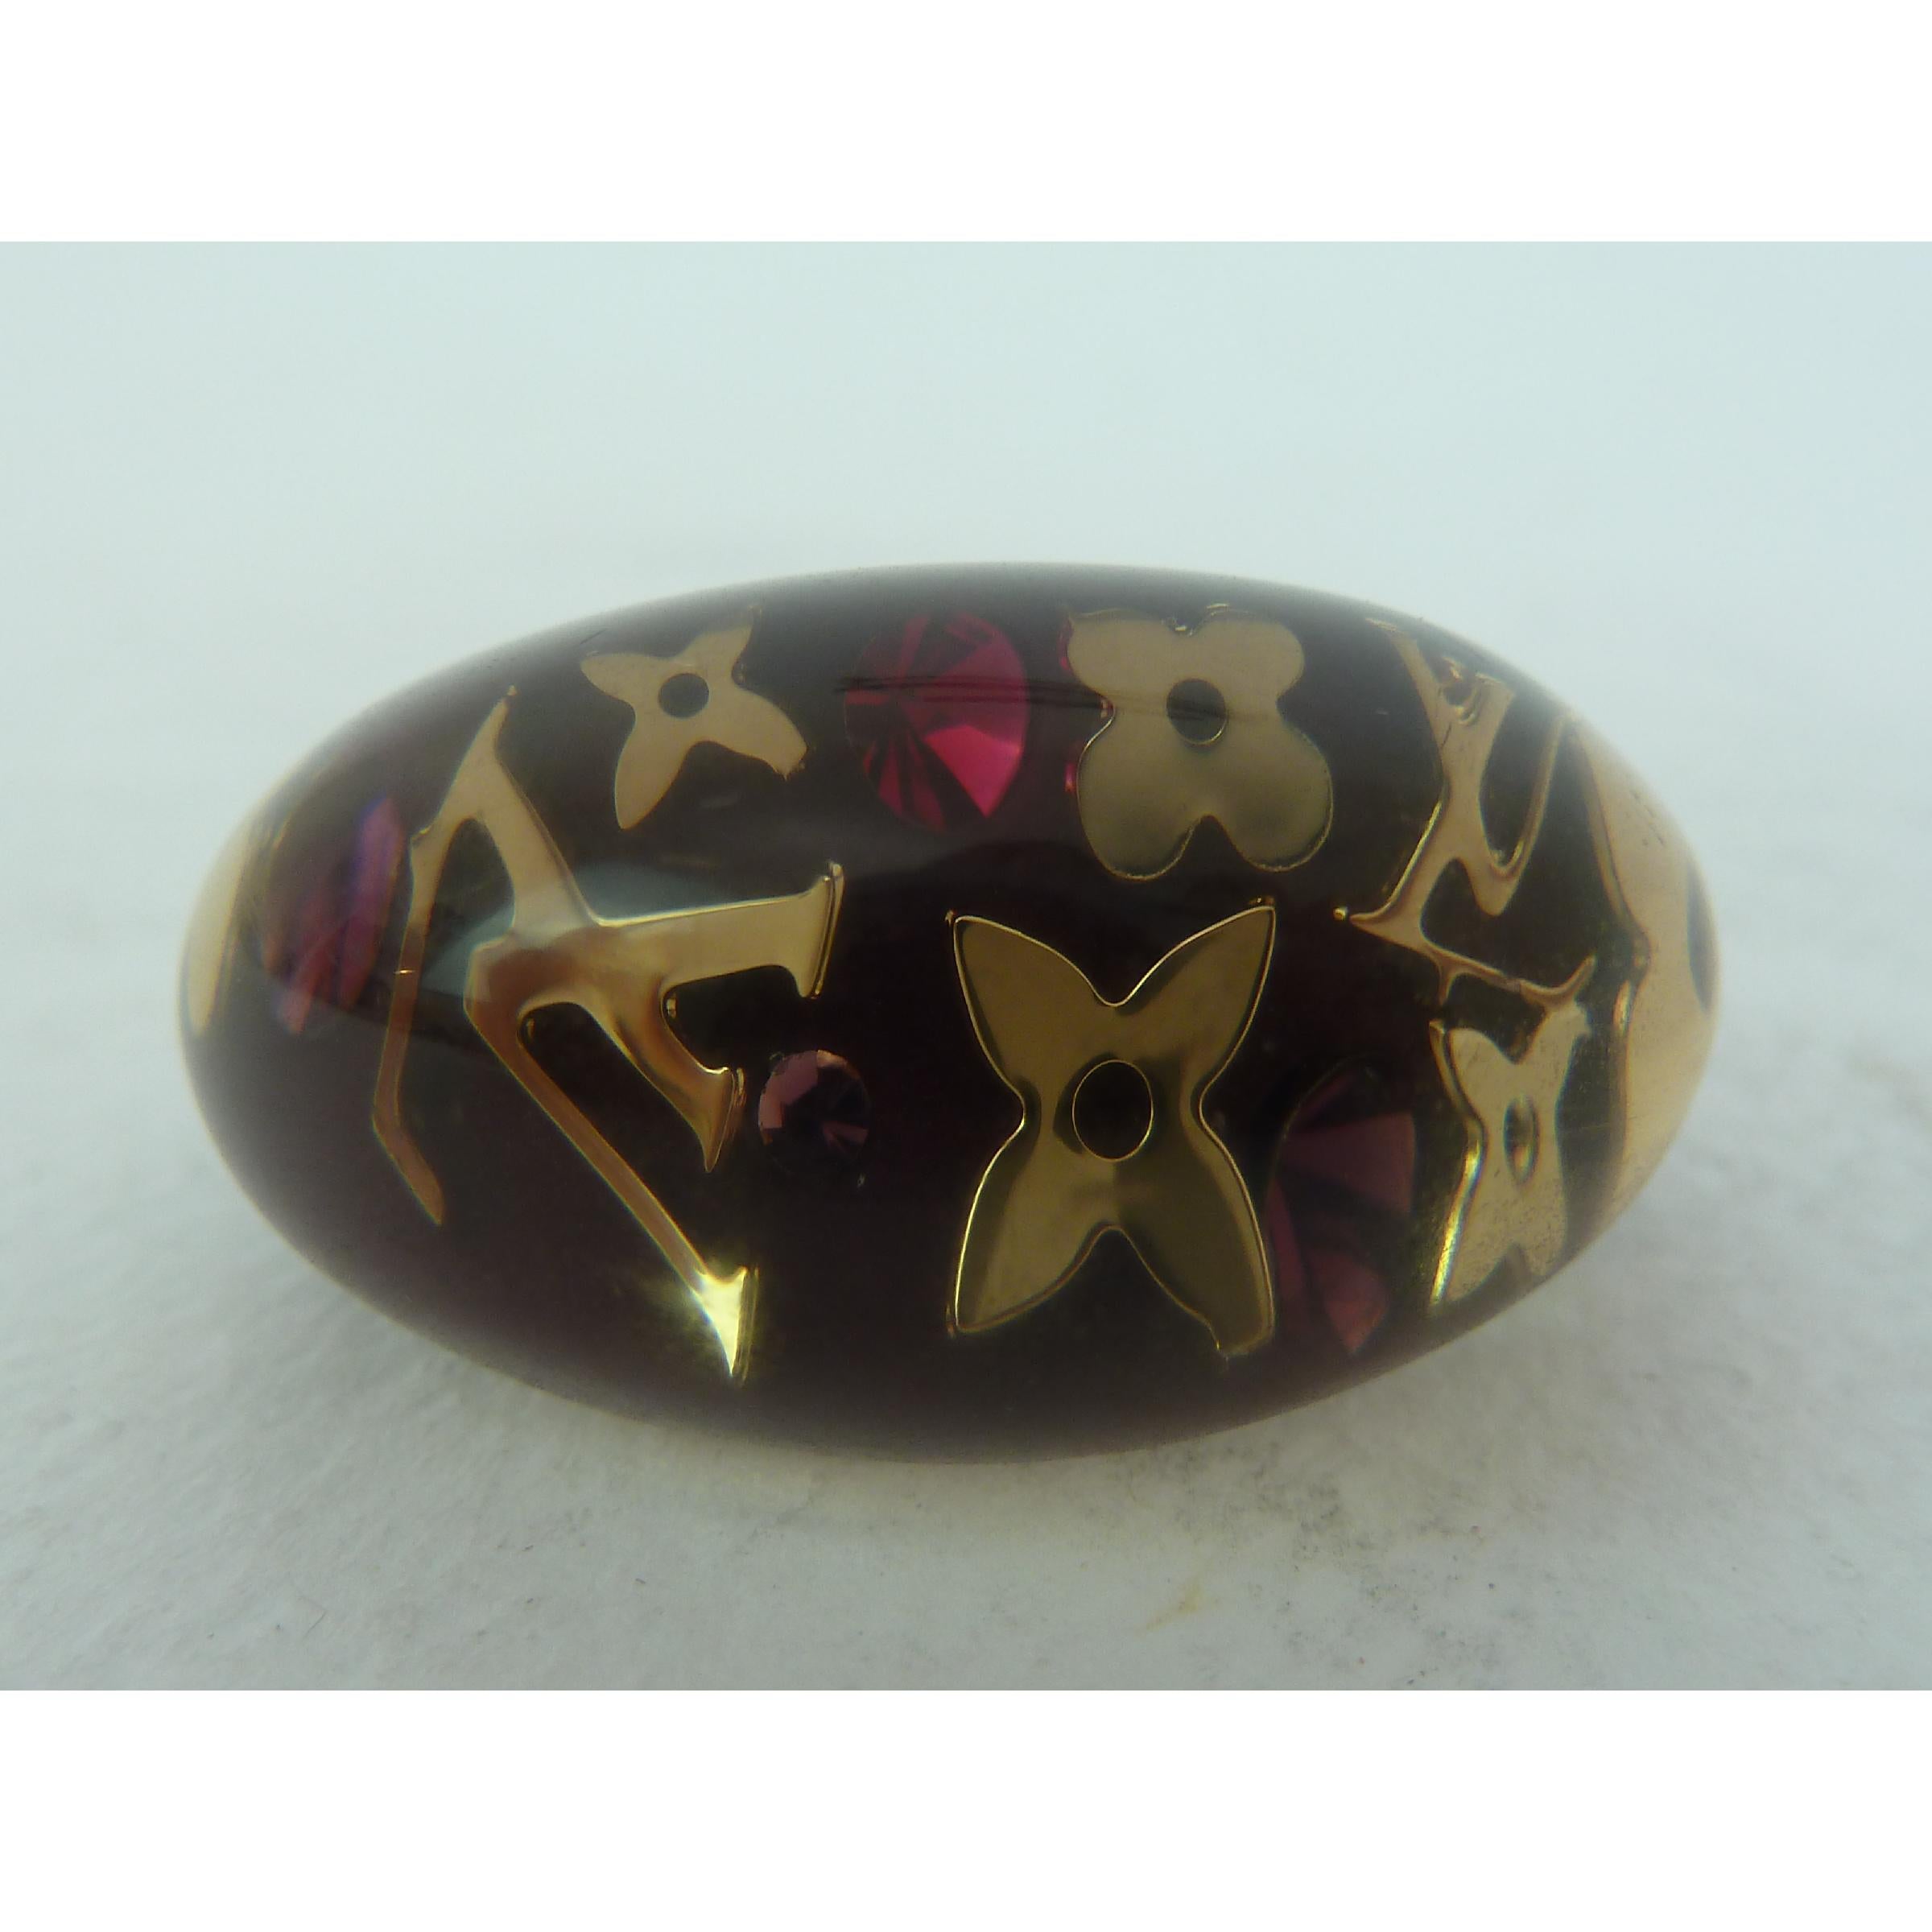 Louis Vuitton women's ring, purple color with flowers and monogram gold and pink inside, resin material. Made in Italy. Excellent conditions. Code: Lk 0141

Measurement: L international

Diameter: 2 cm